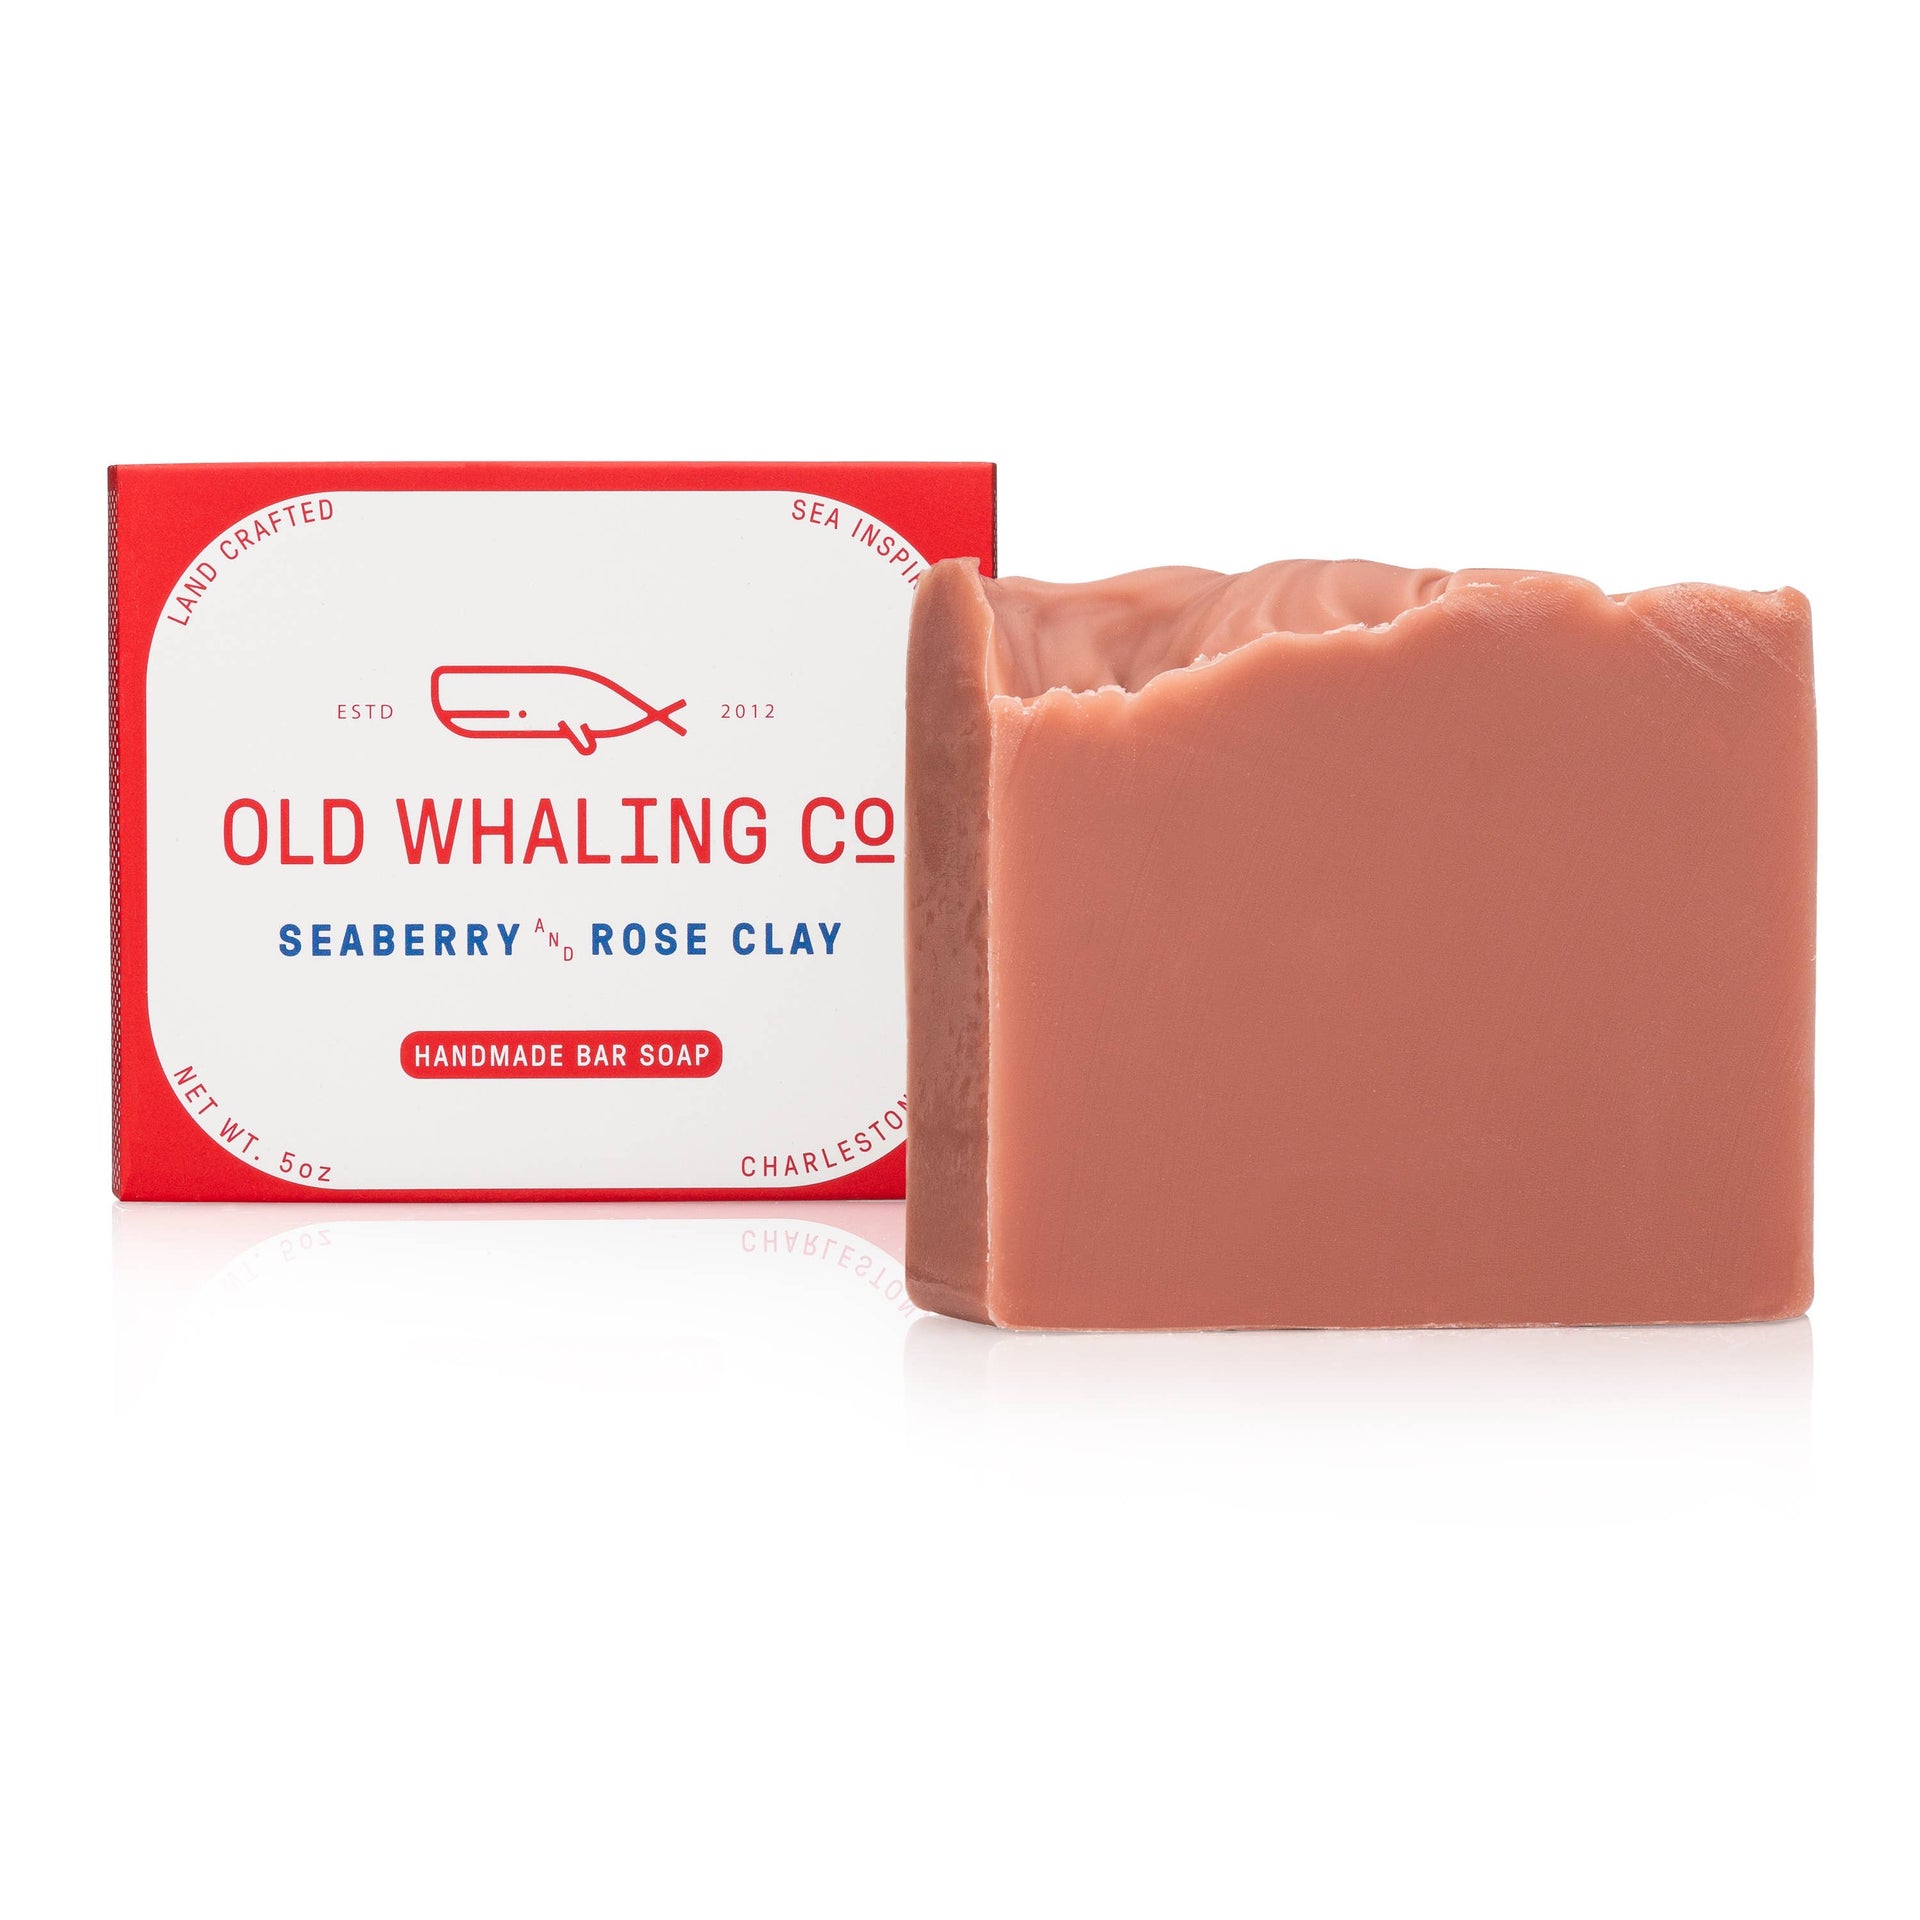 Seaberry & Rose Clay Bar Soap  Old Whaling Company   